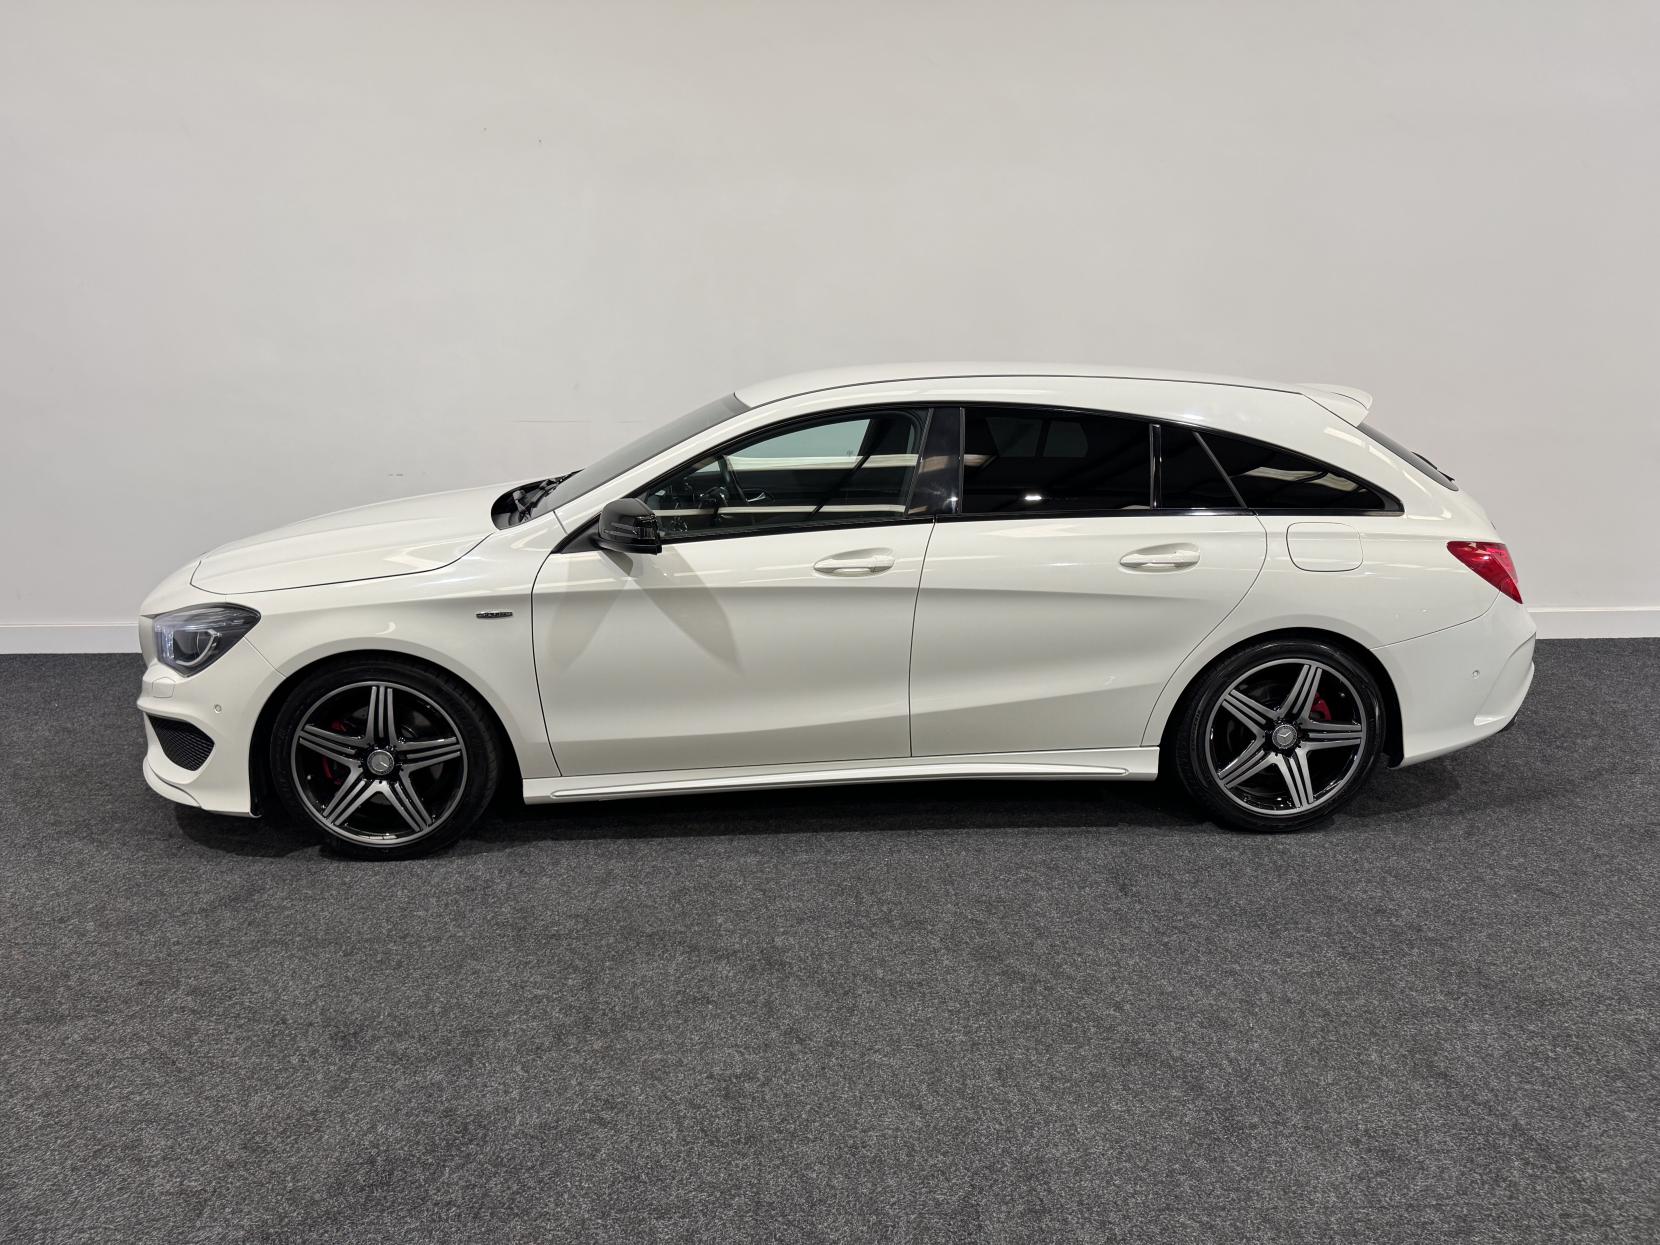 Mercedes-Benz CLA Class 2.0 CLA250 Engineered by AMG Shooting Brake 5dr Petrol 7G-DCT 4MATIC Euro 6 (s/s) (211 ps)